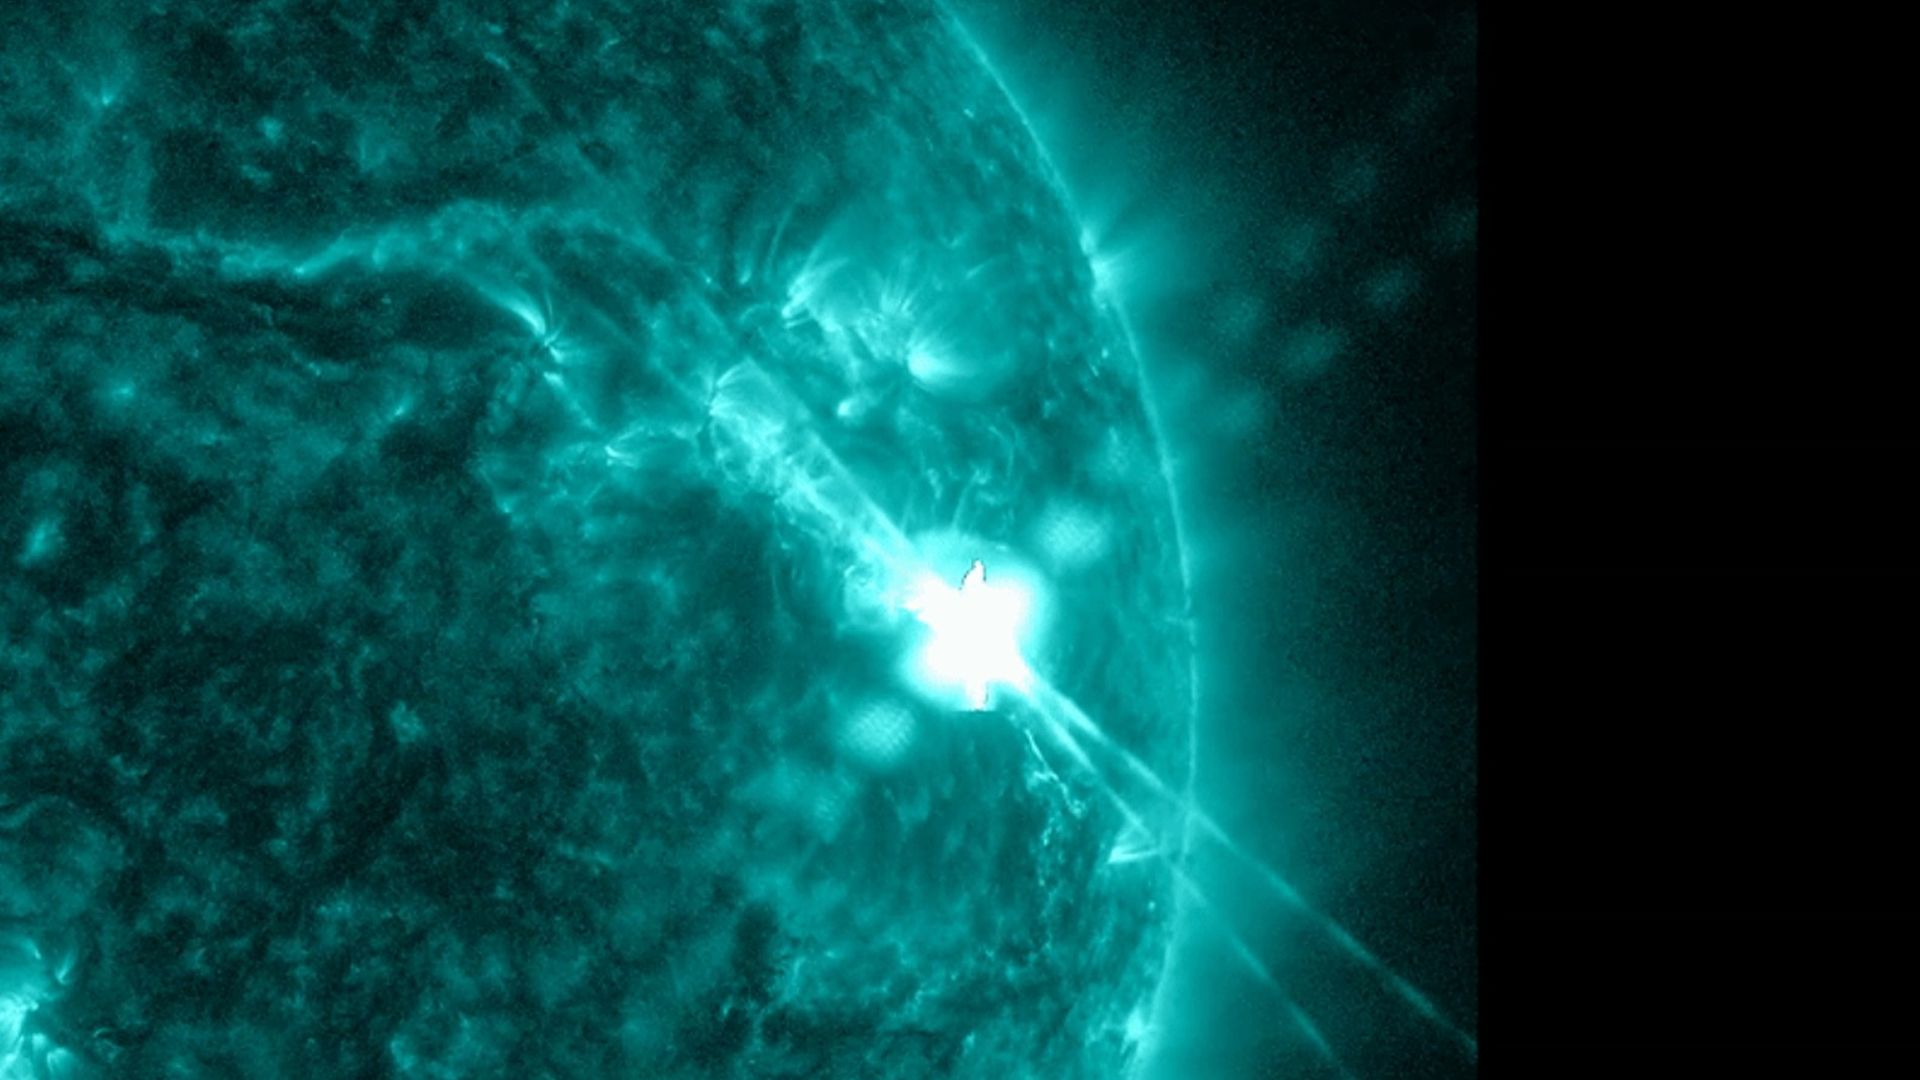 NASA’s Solar Dynamics Observatory captured this image of a solar flare – as seen in the bright flash in the upper right – on Dec. 14. The image shows a subset of extreme ultraviolet light that highlights the extremely hot material in flares, and which is colorized in teal. 